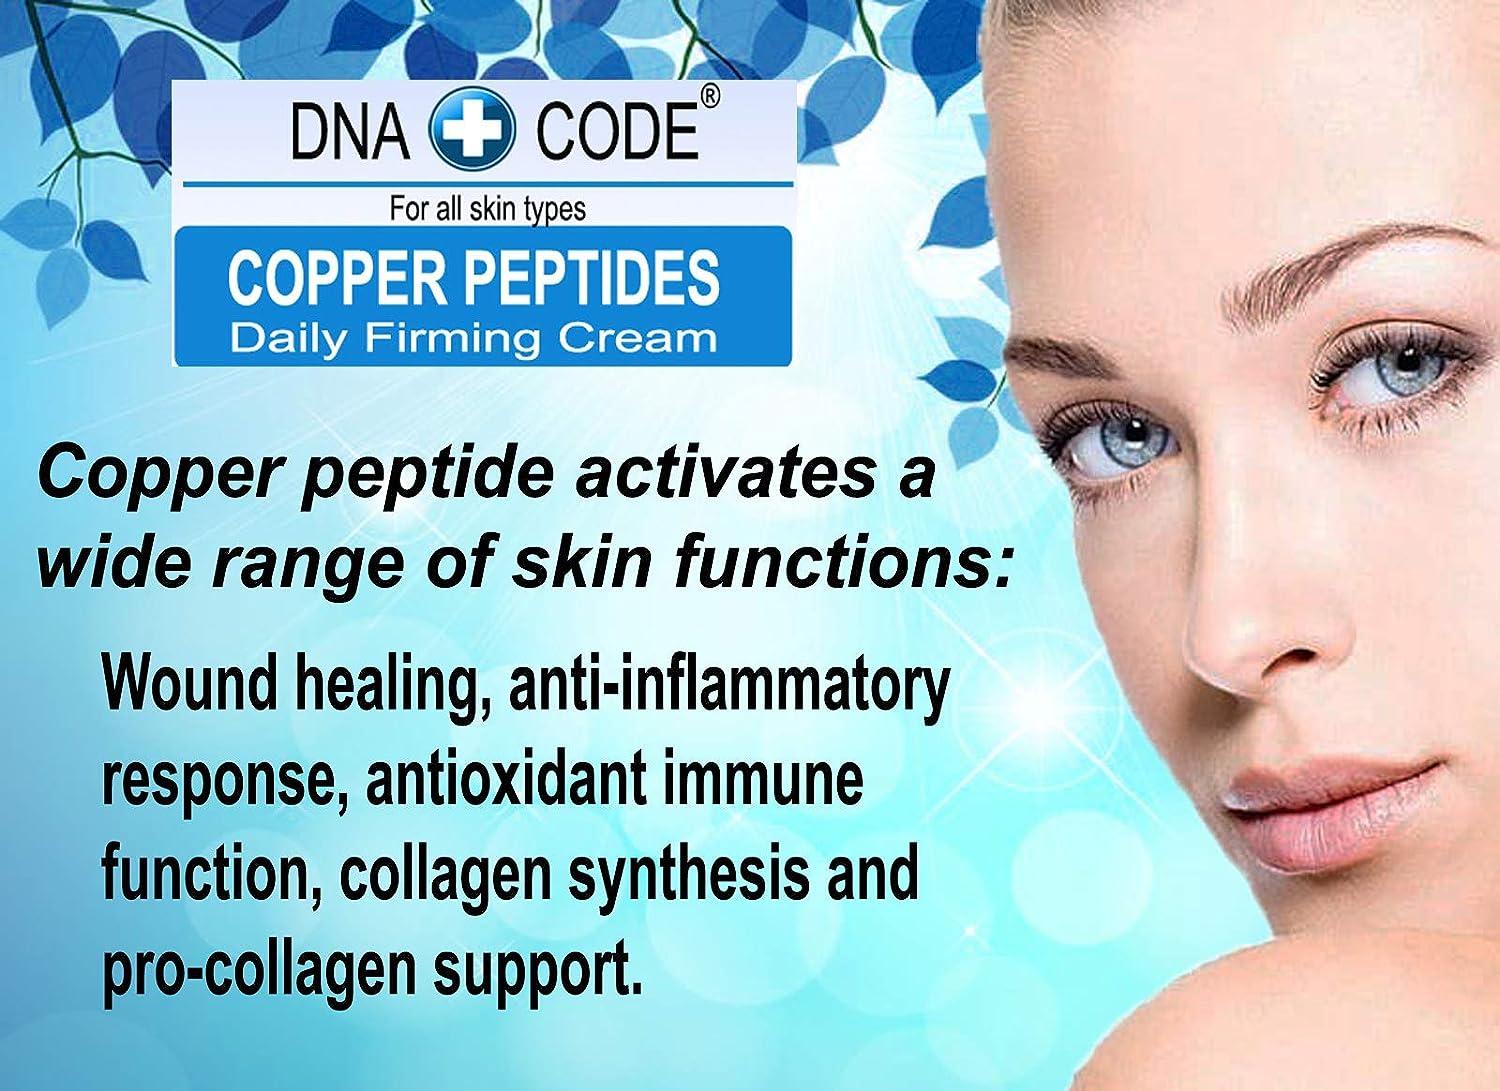 DNA CODE Skin Care Magic Firming Cream-Copper Peptides Daily Firming  Cream-Argireline Matrixyl 3000 SNAP-8 Pentapeptide-18 (Leuphasyl) SYN-AKE  Copper Peptide Syn-Coll Syn-Tacks 2 Ounce (Pack of 1)